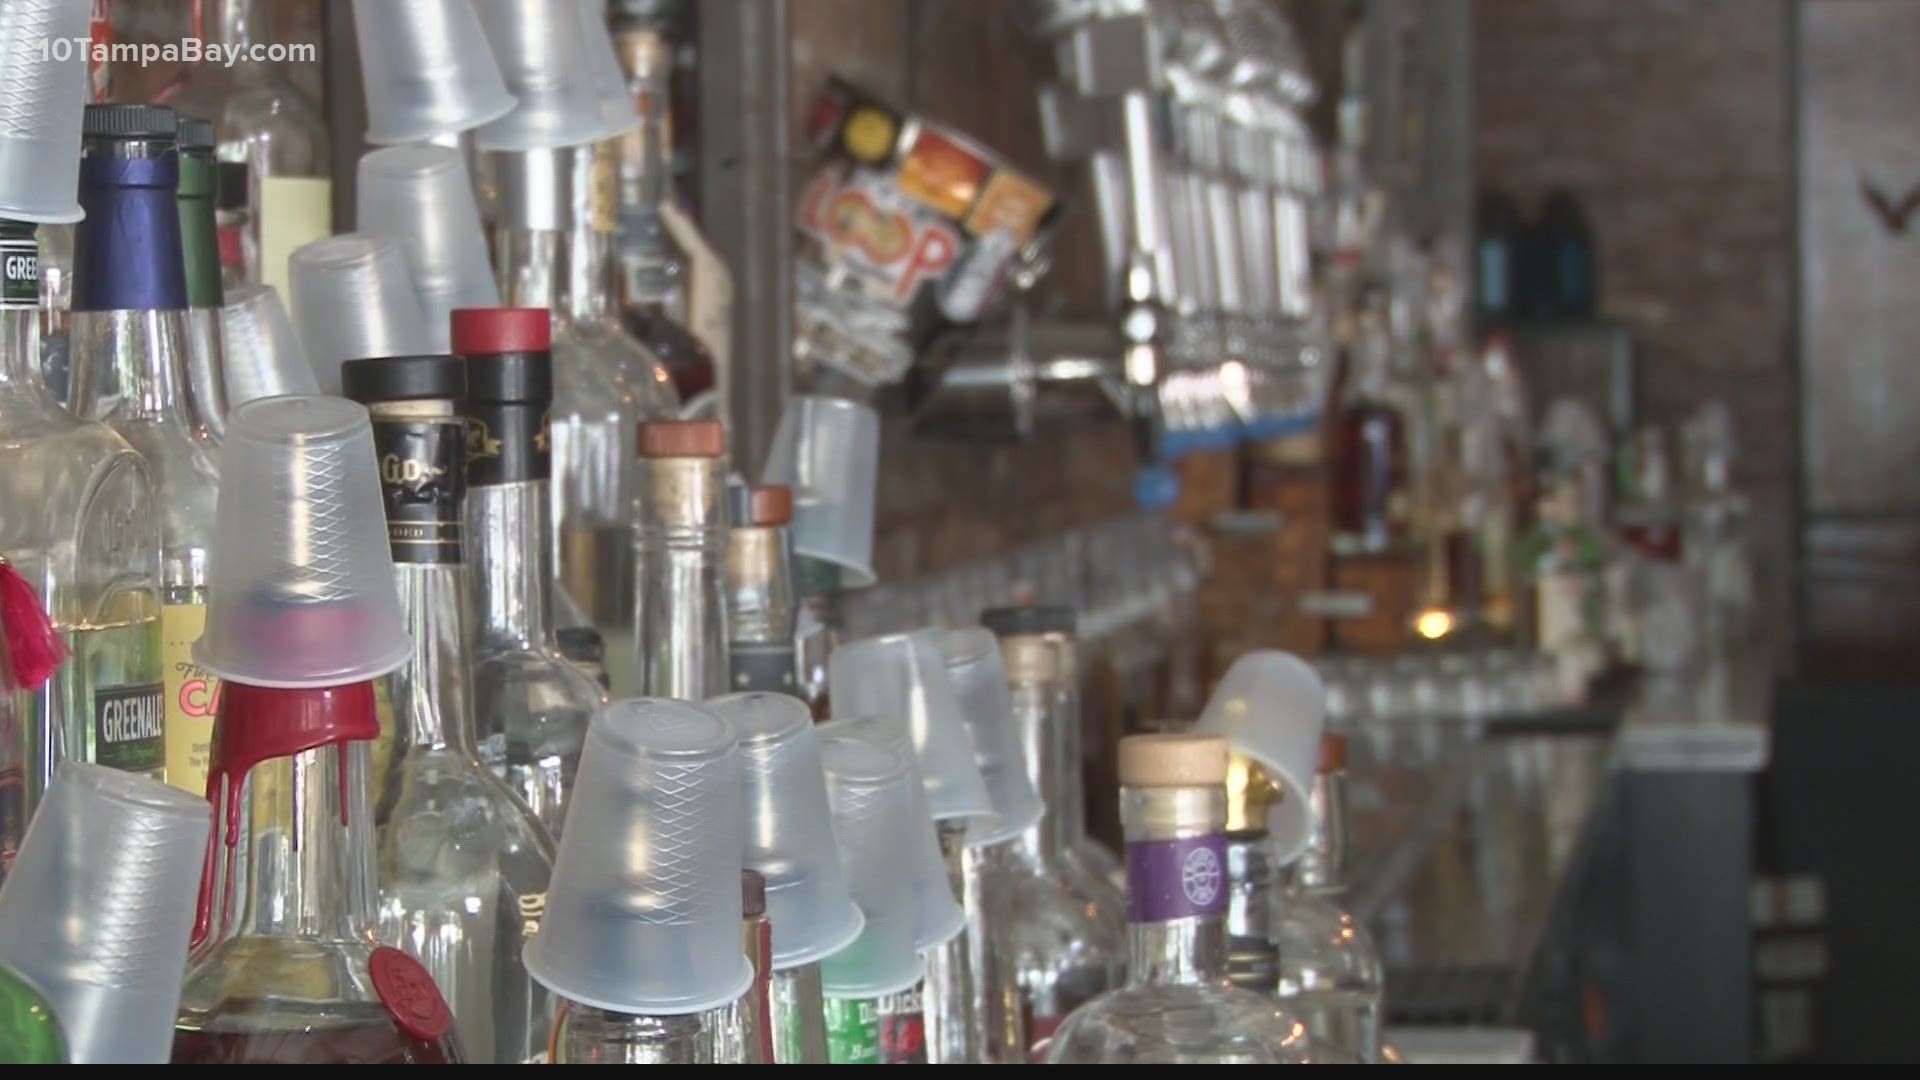 Bars and breweries in most Florida counties were able to reopen on Monday after being shut down.